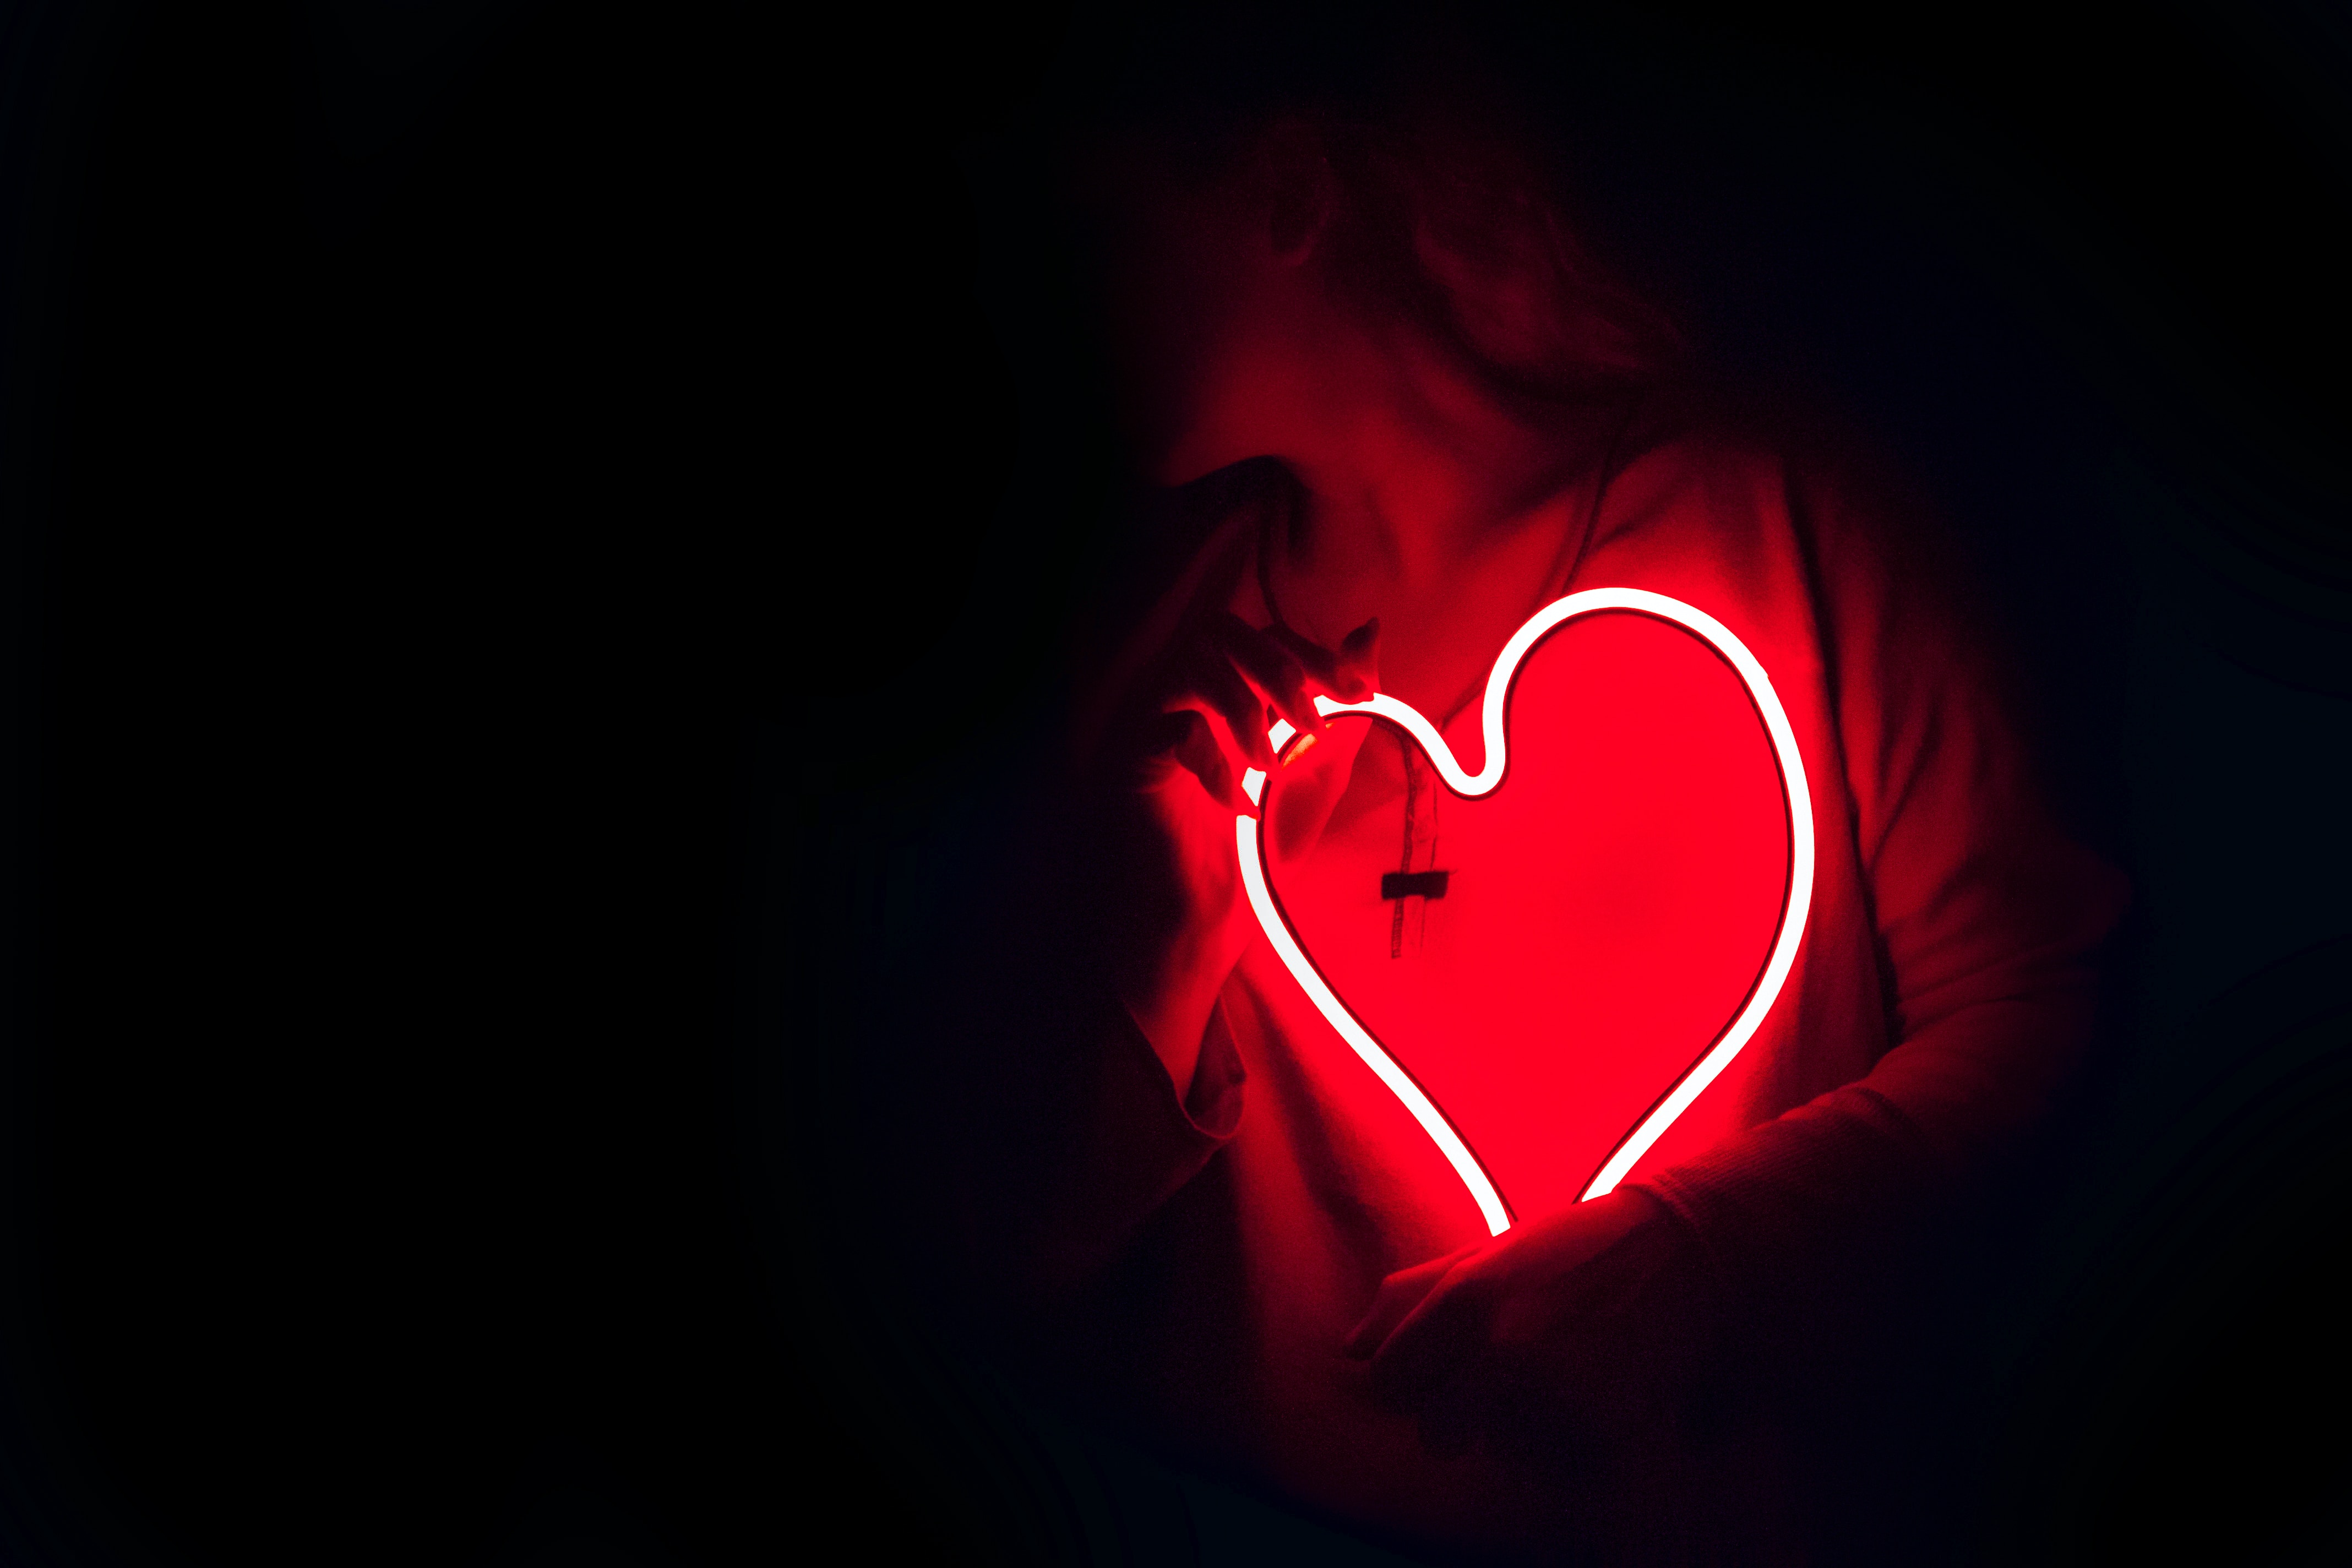 An image of an individual holding a glowing heart to their chest. | Source: Unsplash